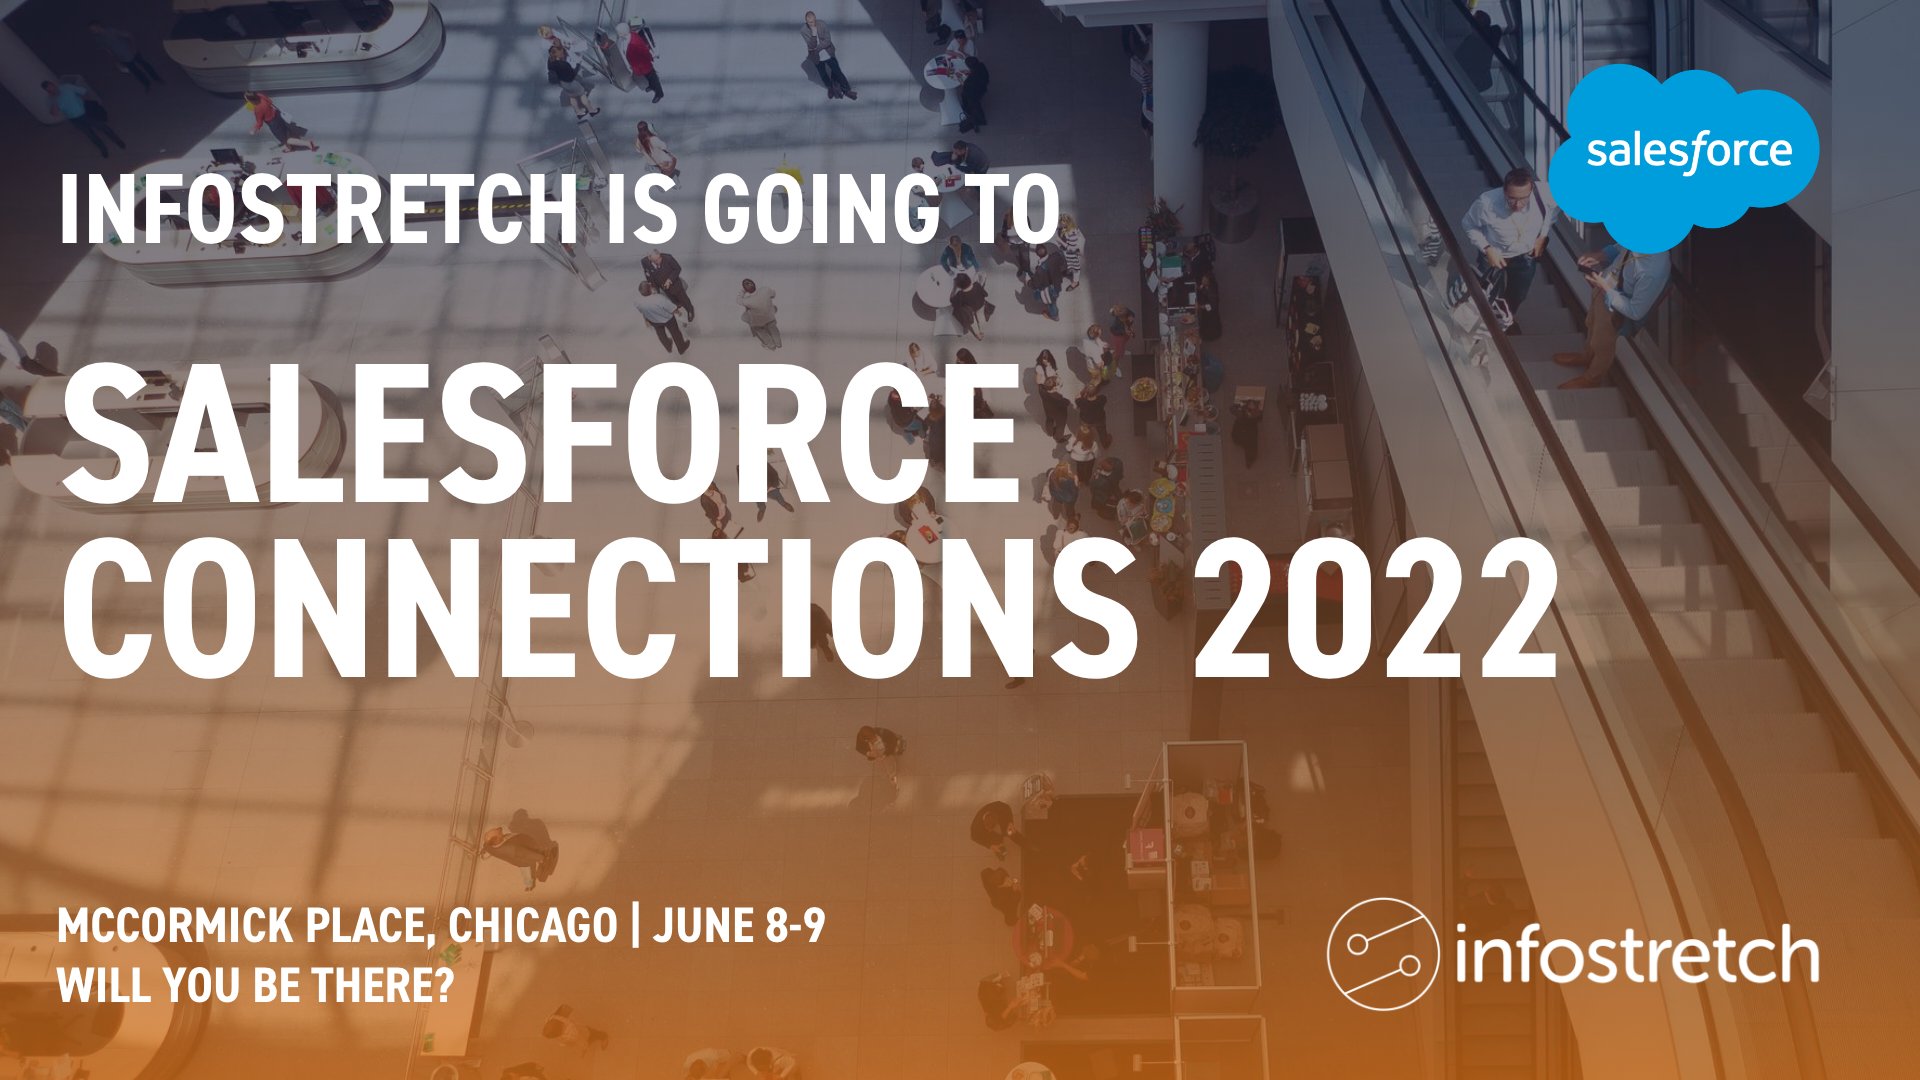 Infostretch on Twitter "Infostretch is going to Salesforce Connections